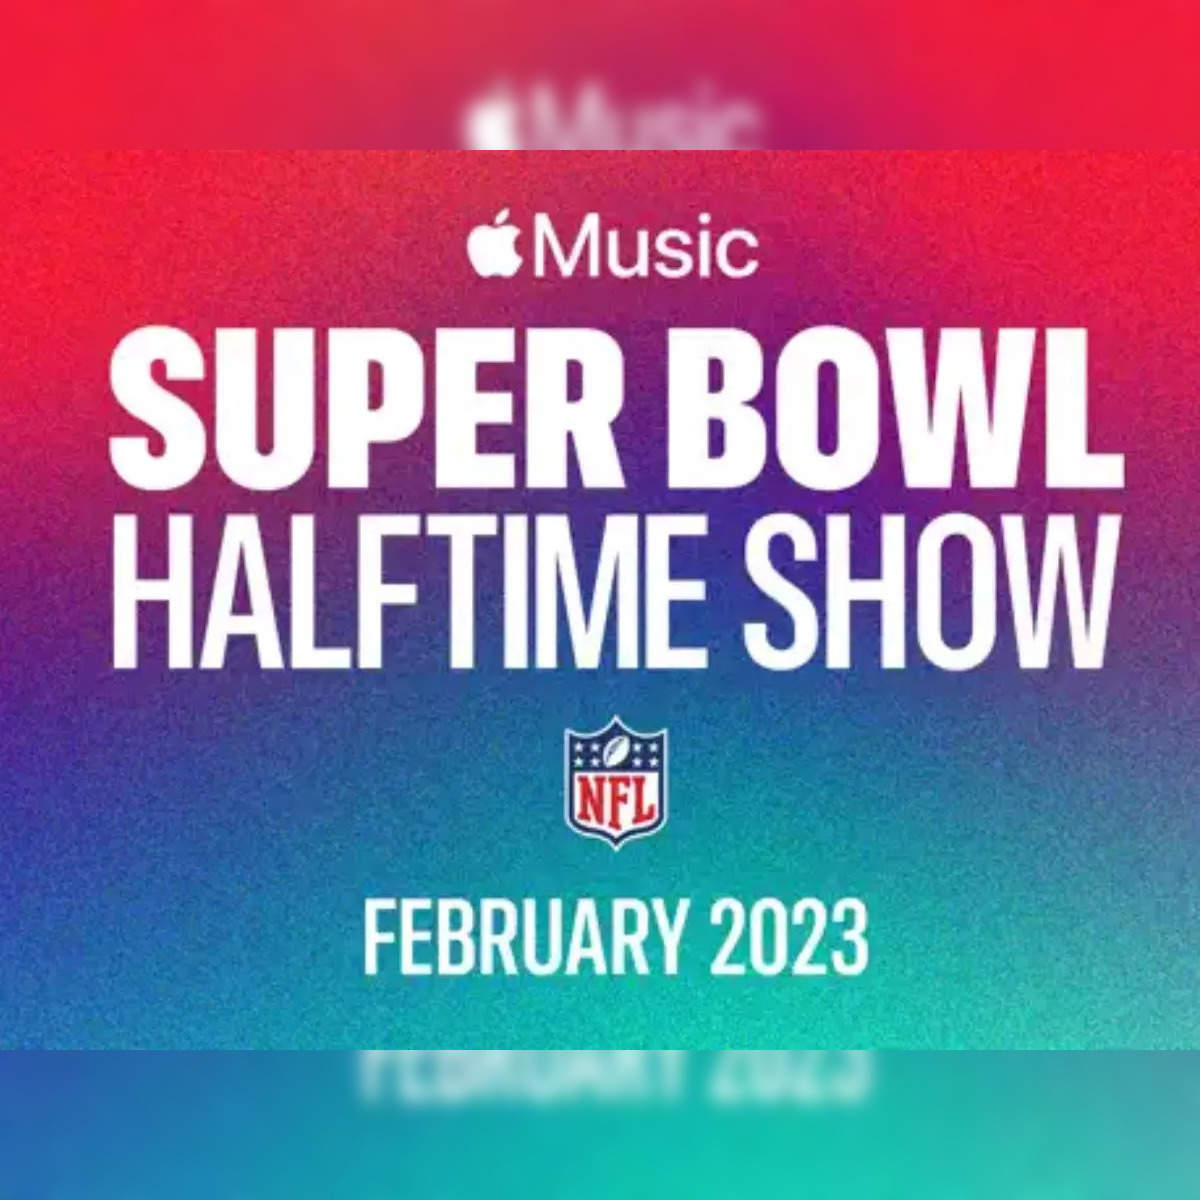 In the Super Bowl 2022 Halftime Show, the NFL Couldn't Boss Dr